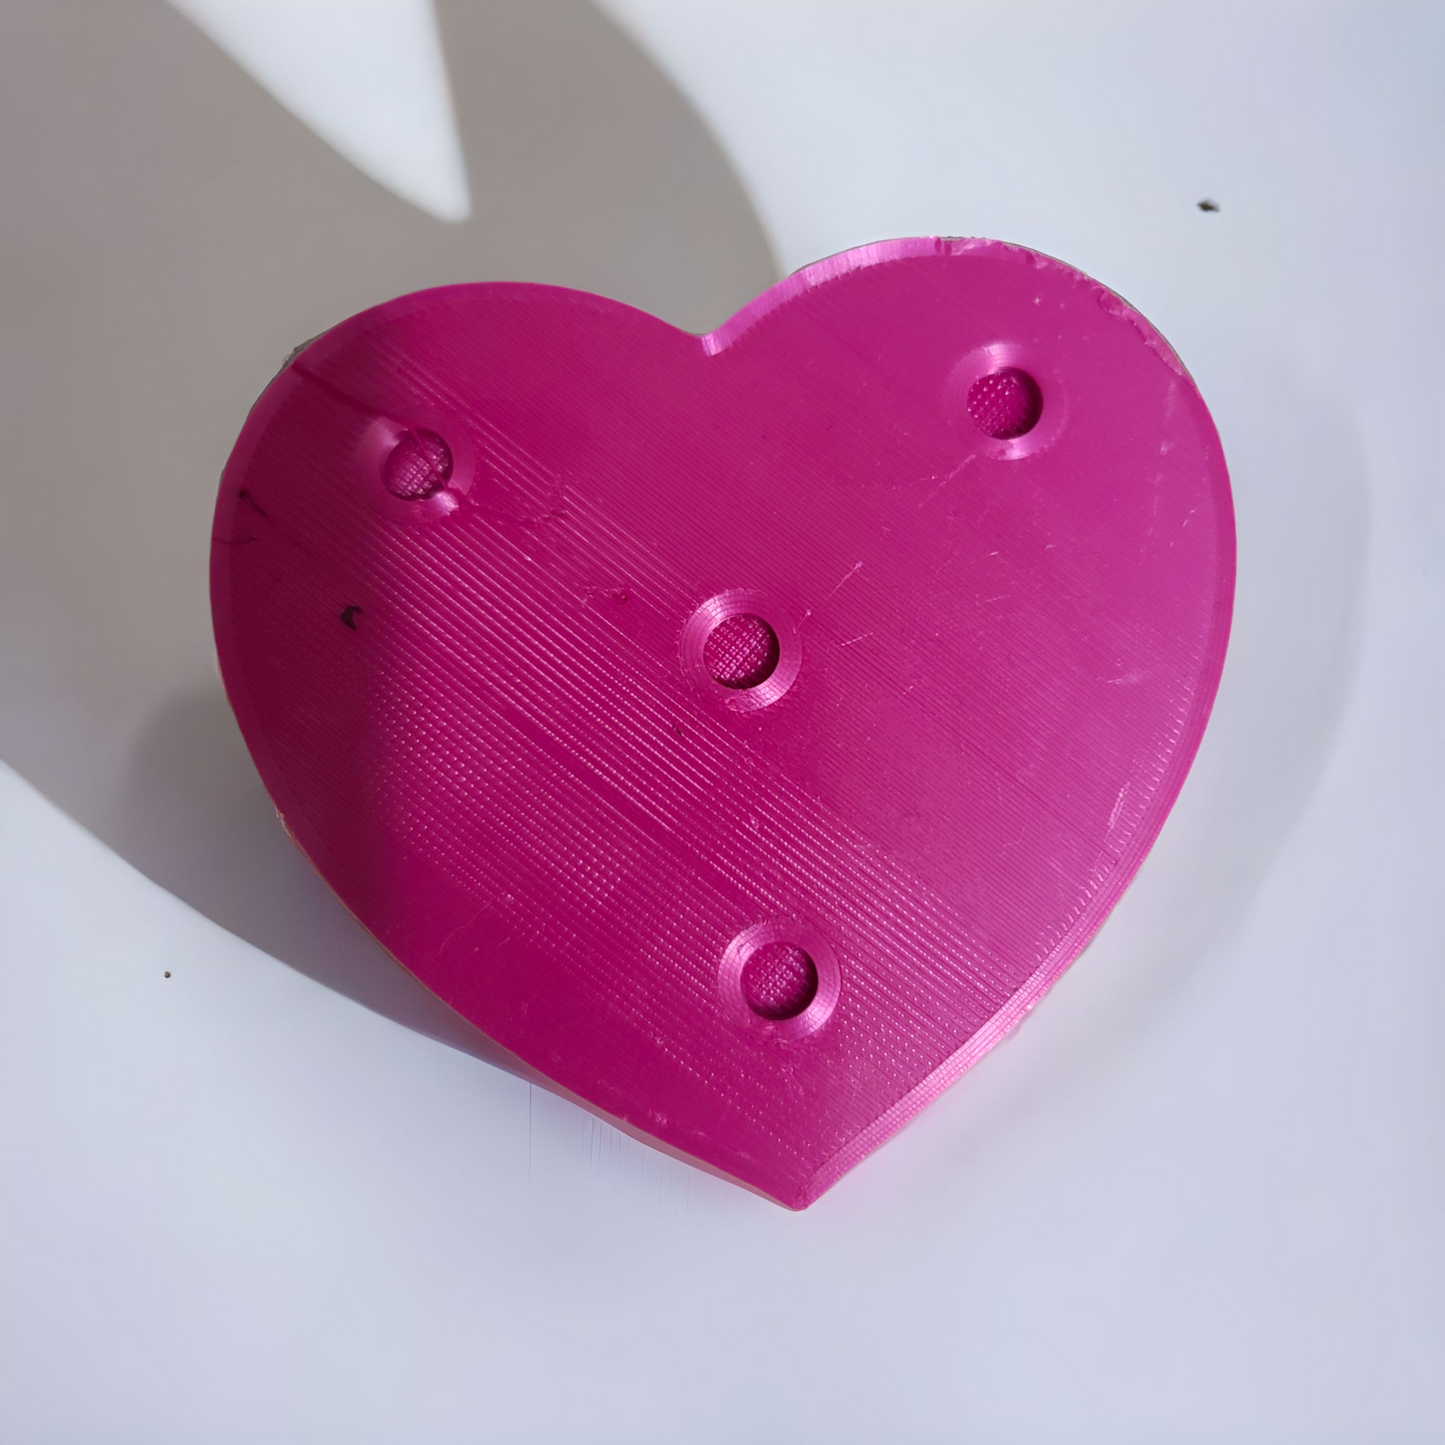 3d print, Conversation heart, Valentines Day, party favor, magnet, Romantic Gift, love you, miss you, be mine, hug me, kiss me, message